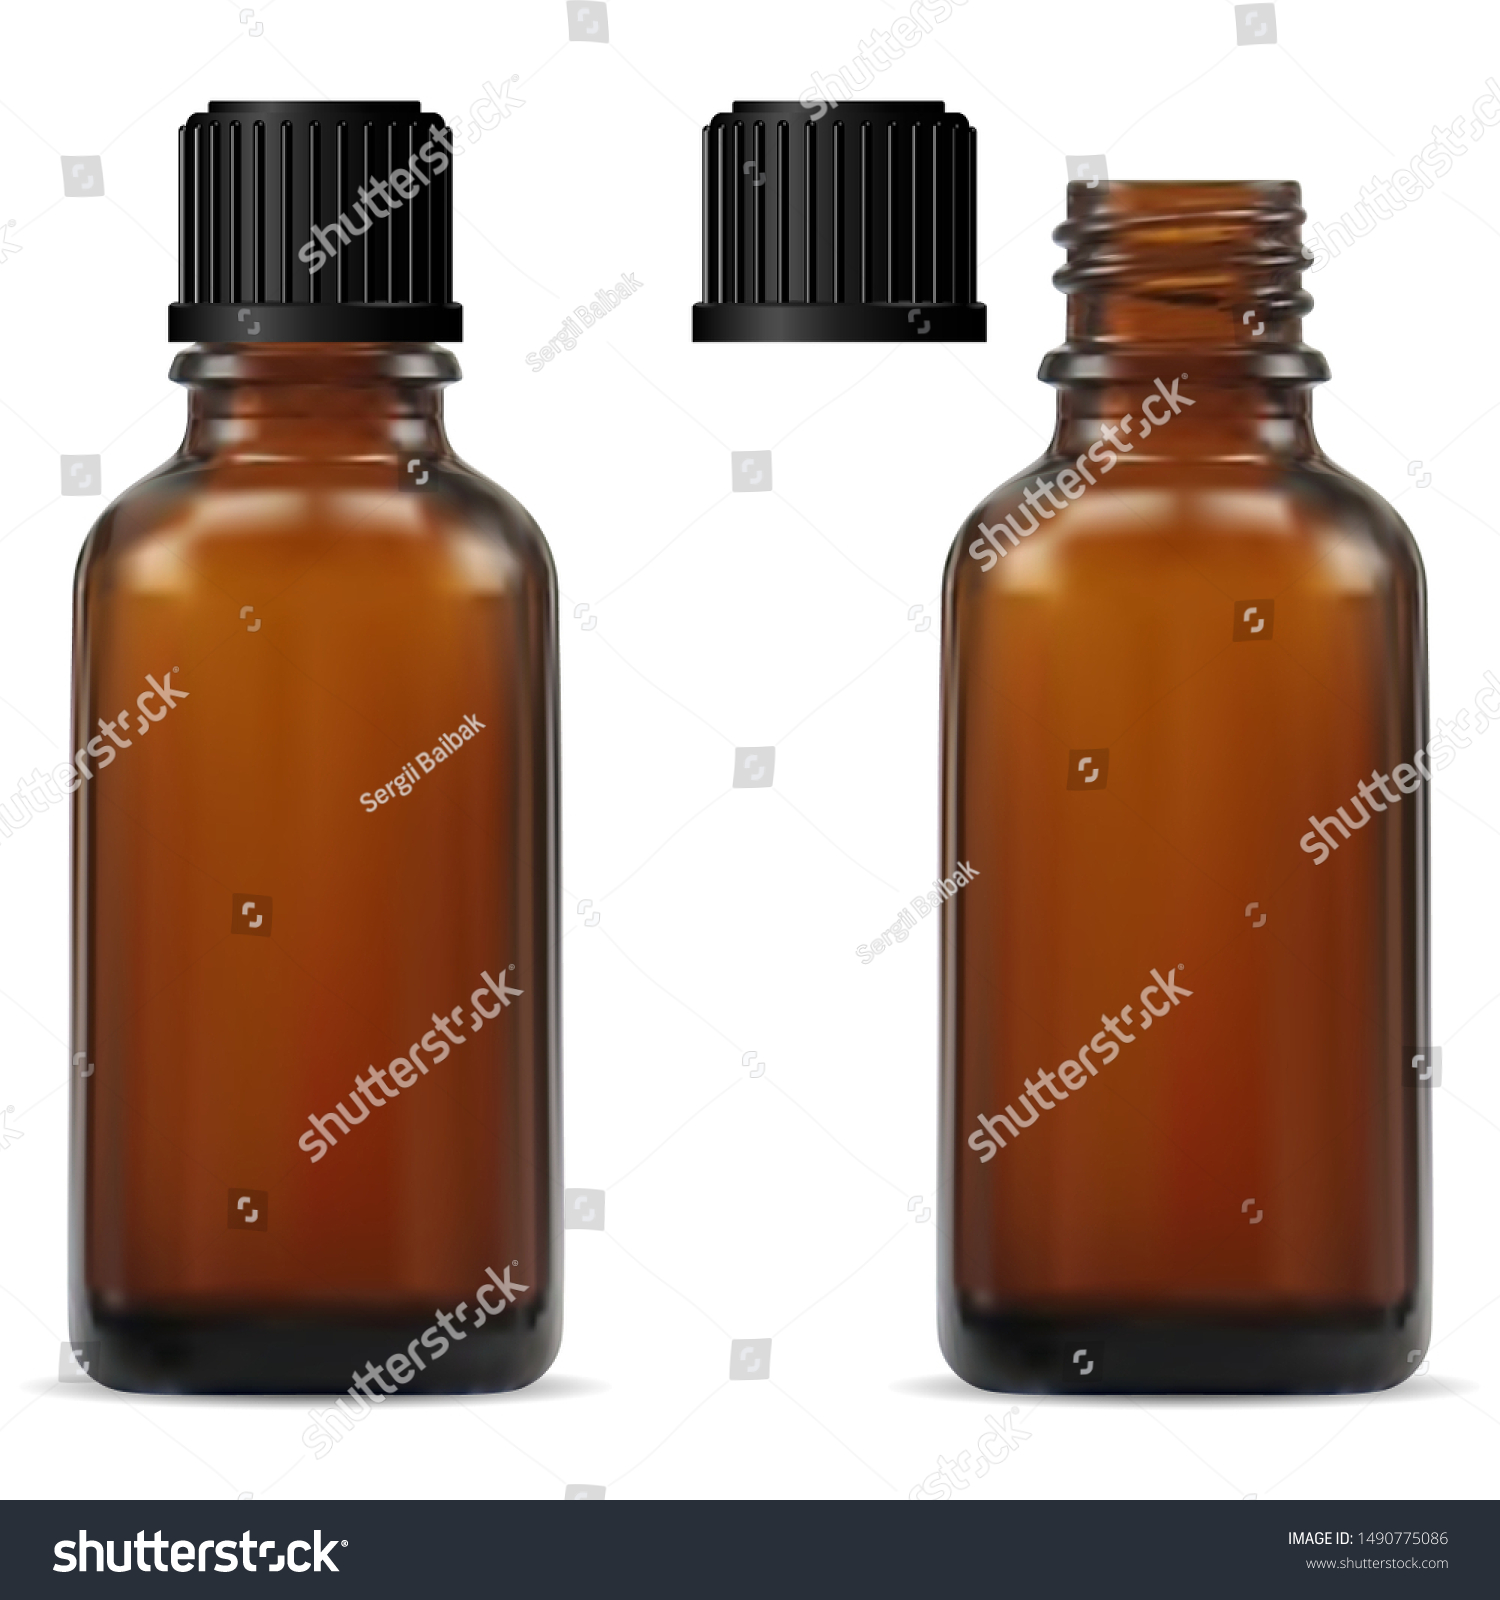 Medical Bottle. Brown Glass Pharmacy Bottle. Realistic Drug Vial Blank. Vitamin Jar Template with Screw Lid Design. Essential Aromatic Oil Container Mockup without Label. Round Medicine Storage #1490775086